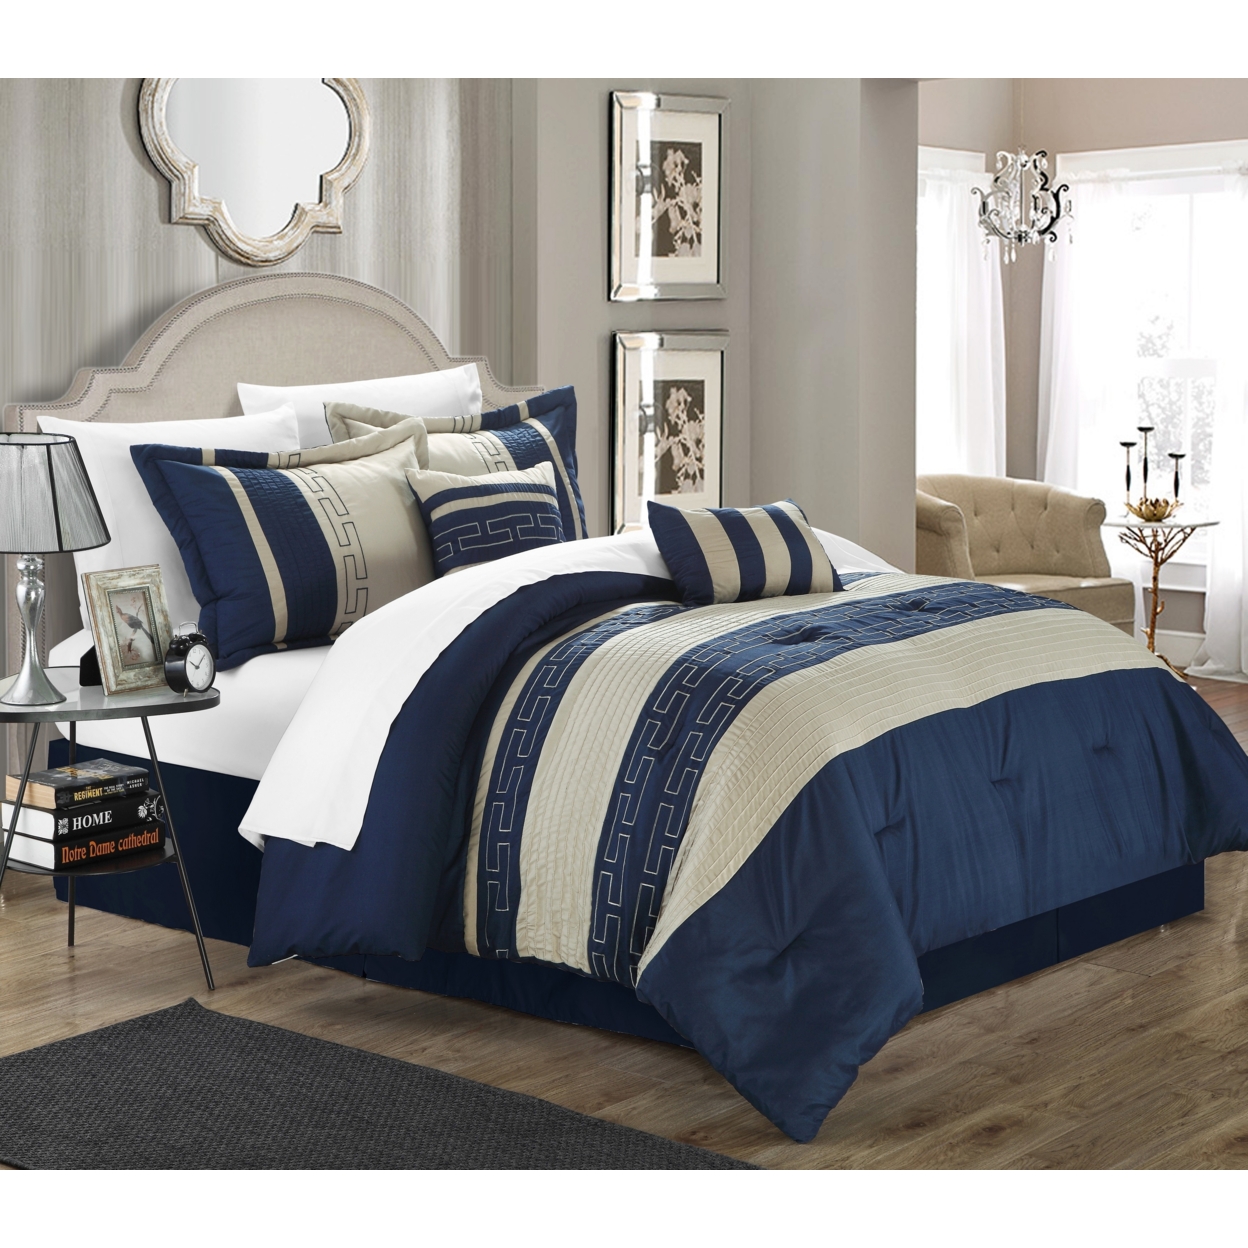 Chic Home Coralie 6-piece Comforter Set Hotel Collection - Navy, King